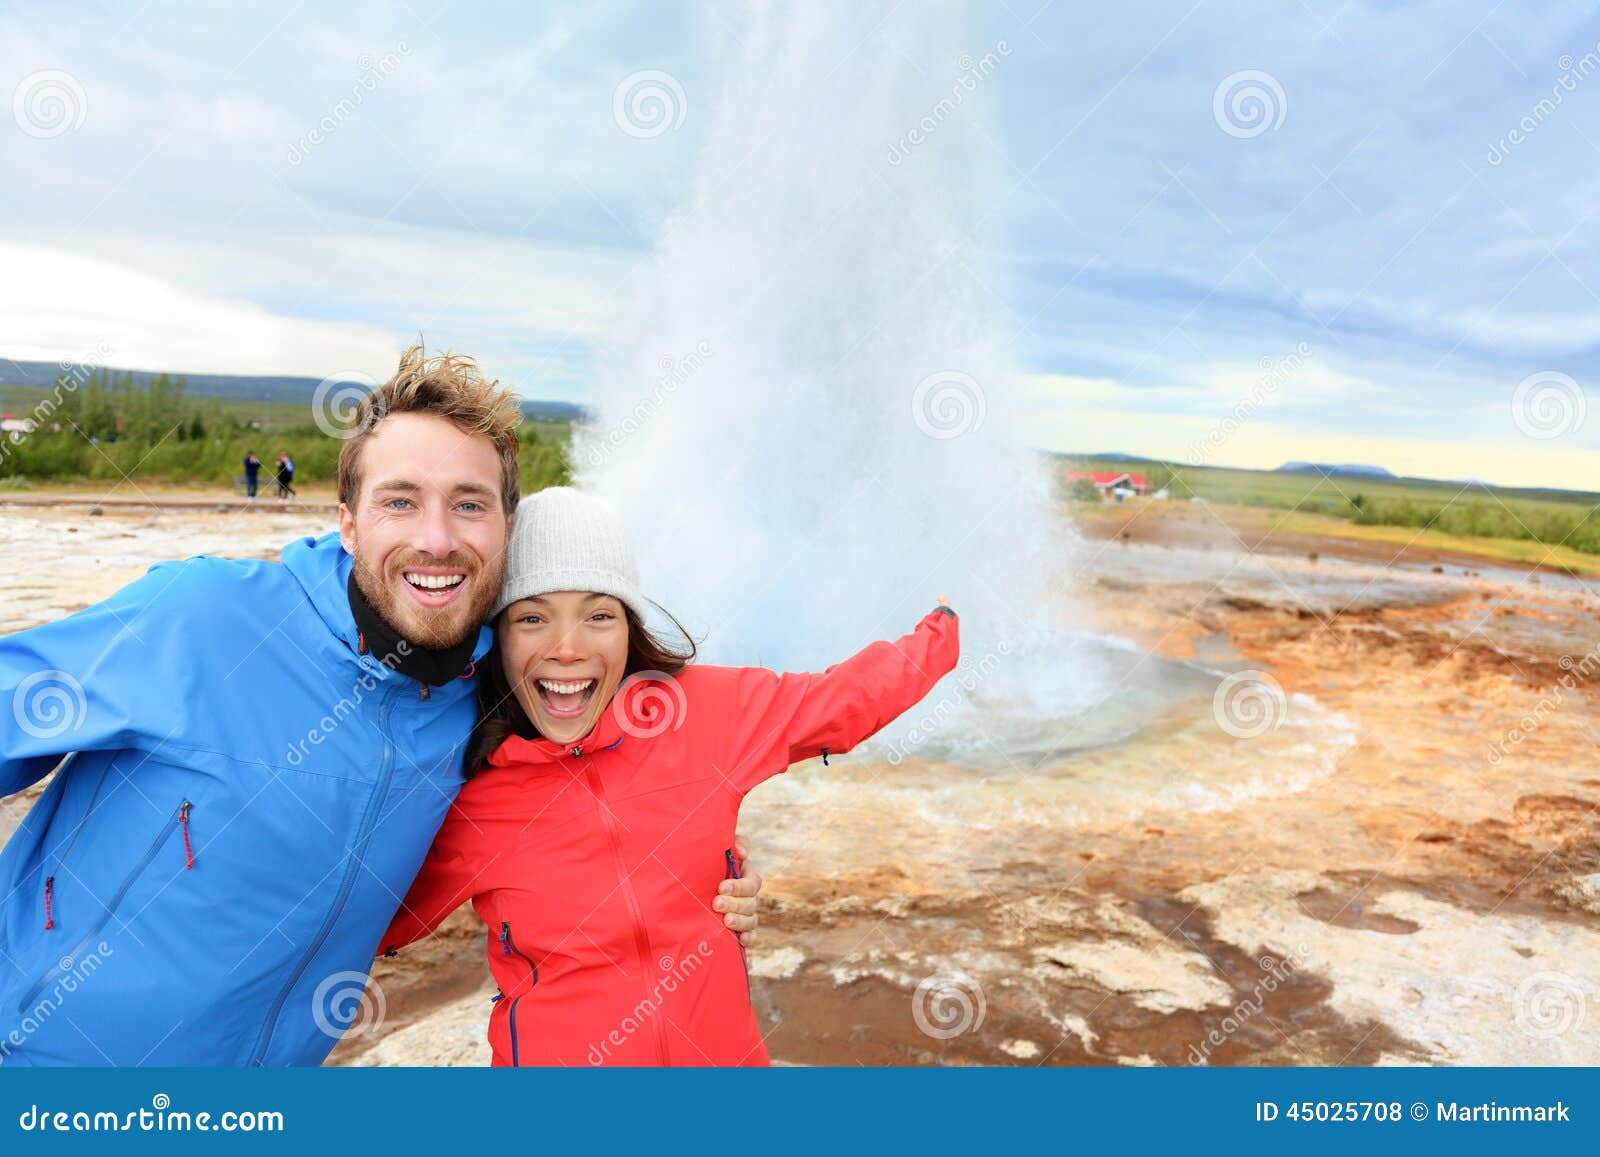 Iceland Tourists Fun By Strokkur Geyser Stock Photo - Image of